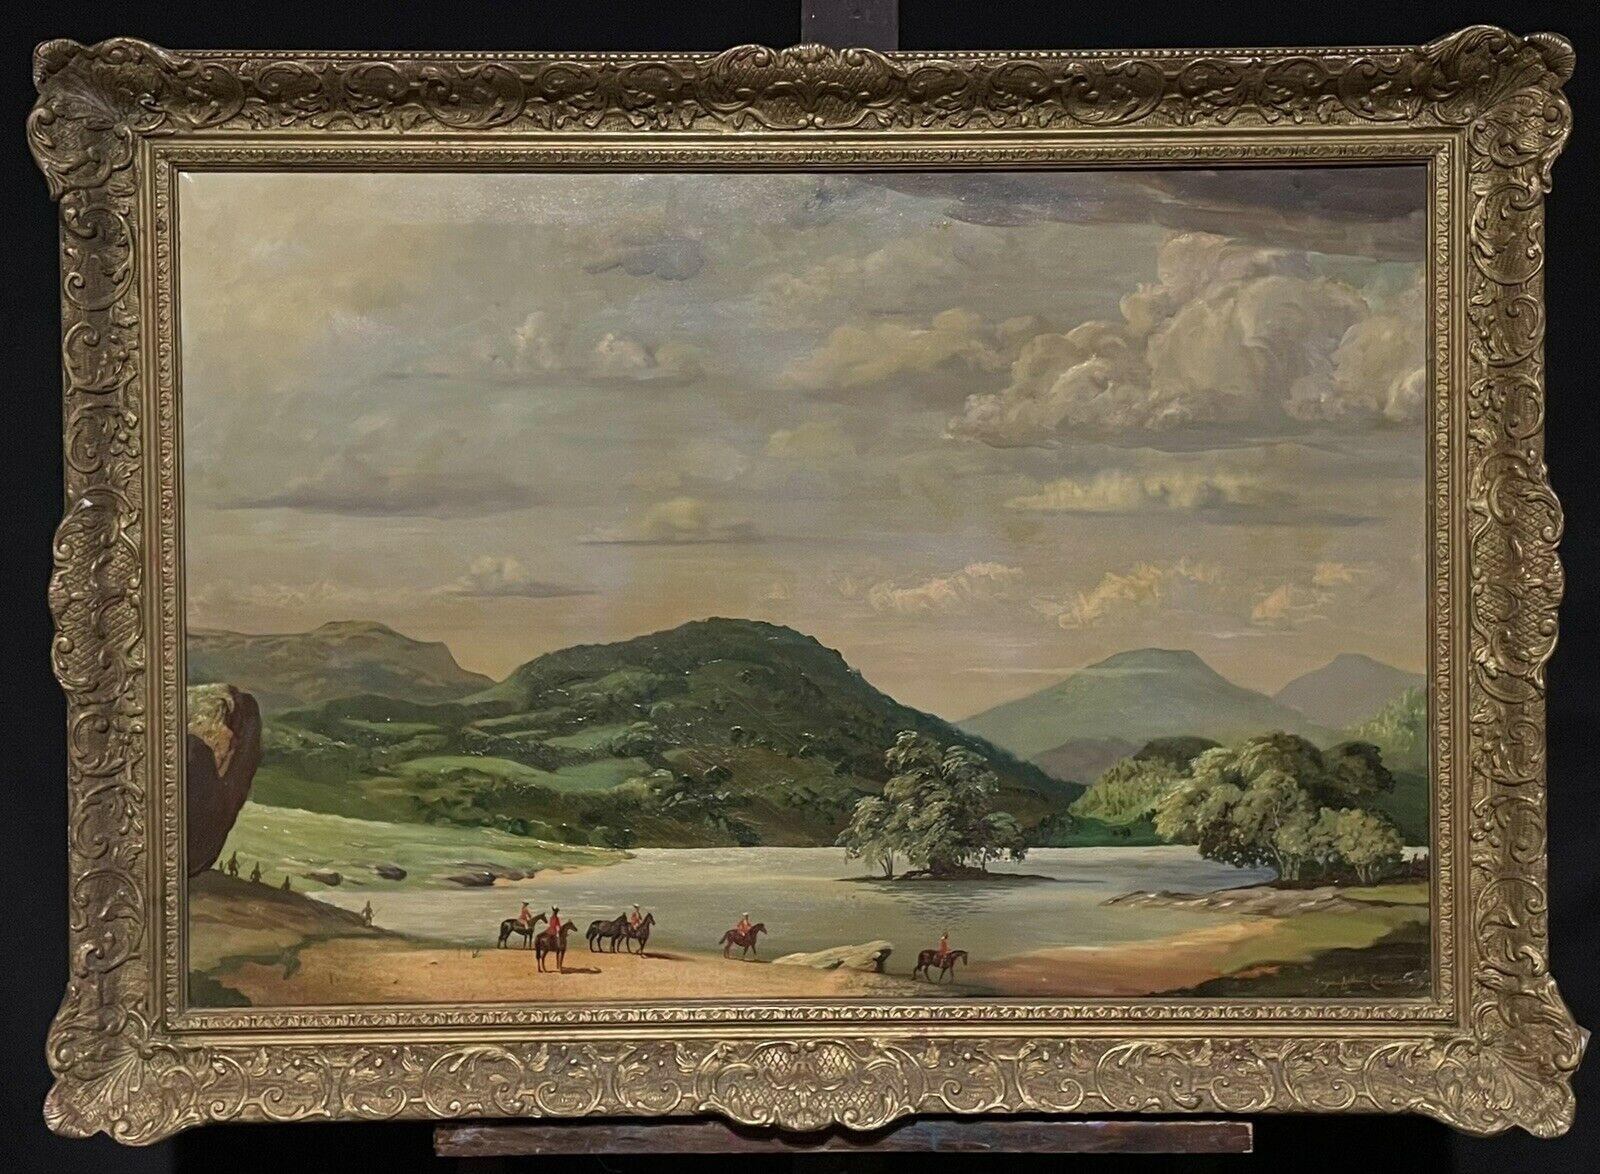 20th century American School Landscape Painting - Huge Traditional Oil Painting Soldiers on Horseback Lakeland Landscape signed